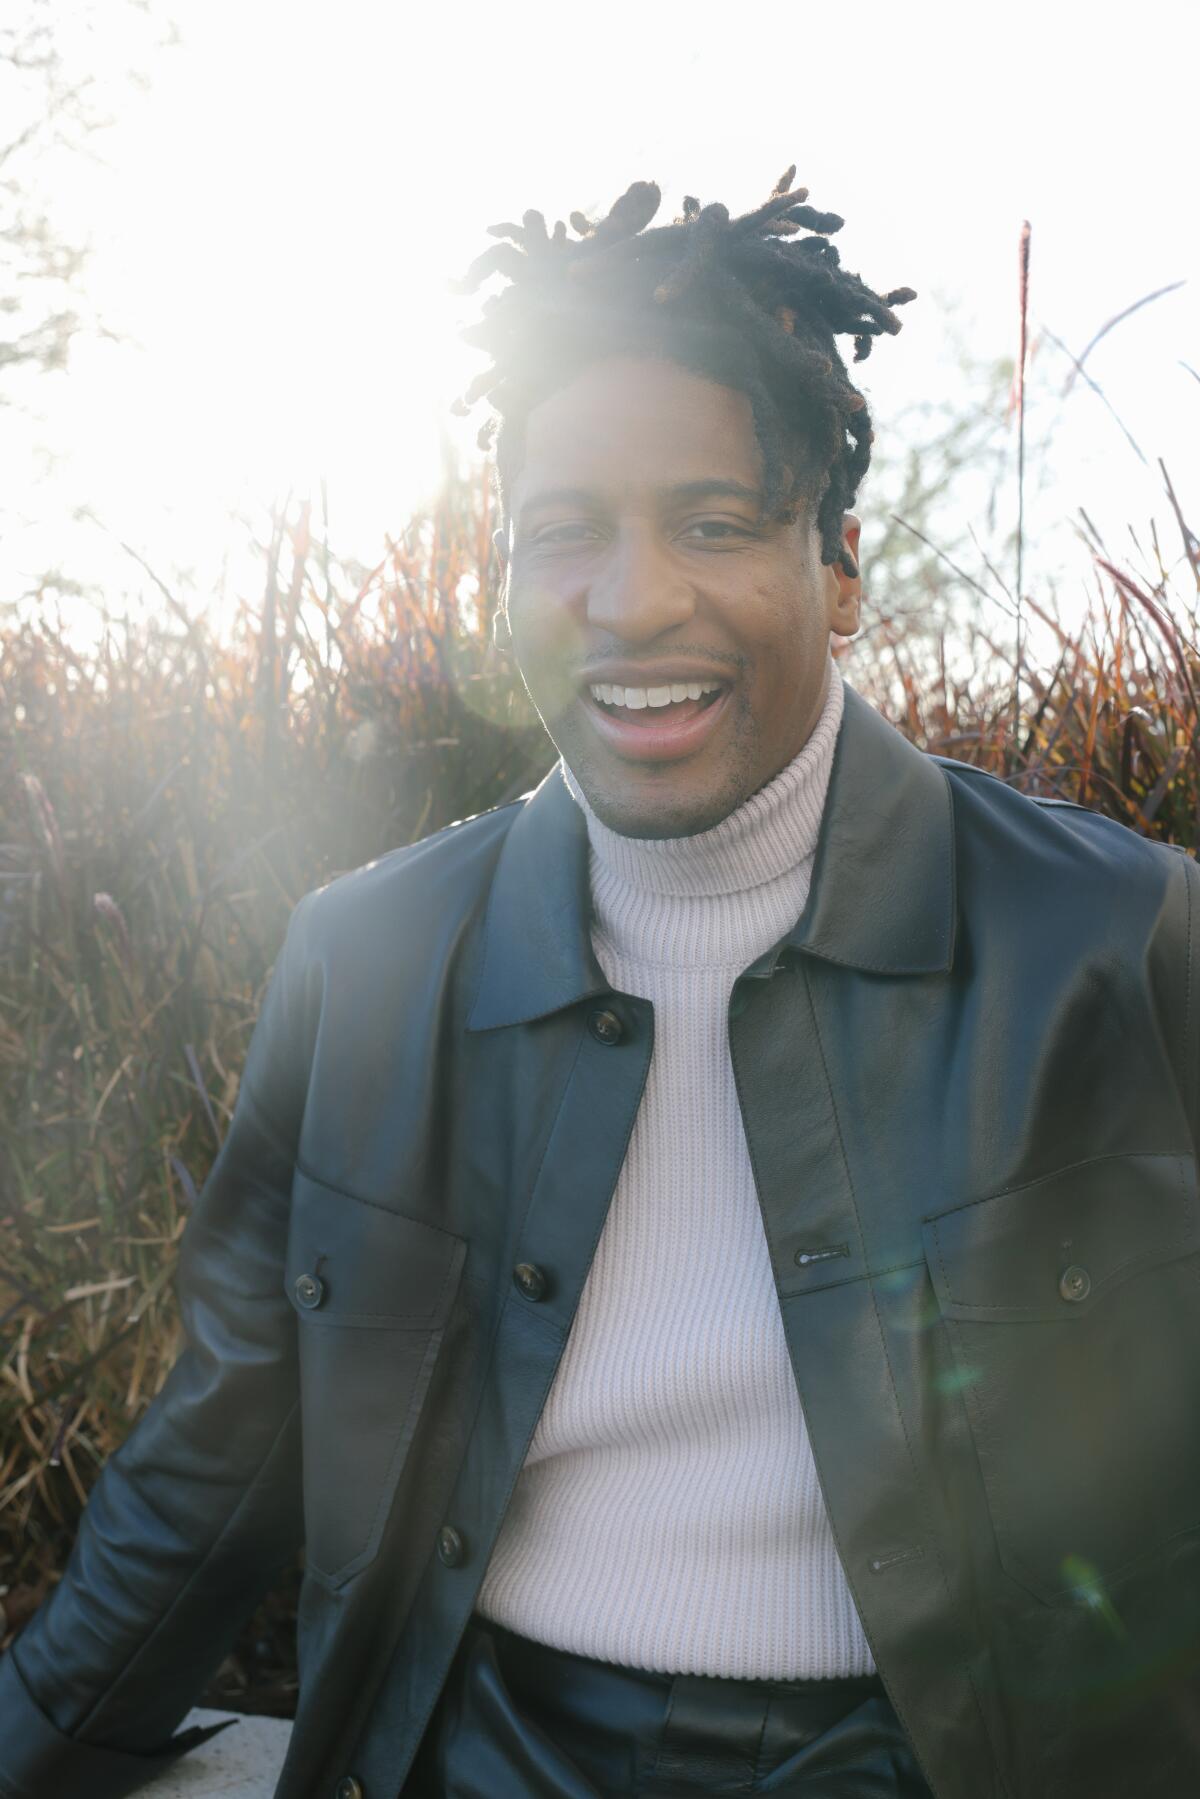 The sun shines behind the face of a smiling man with dreadlocks, a white turtleneck and a black leather jacket.